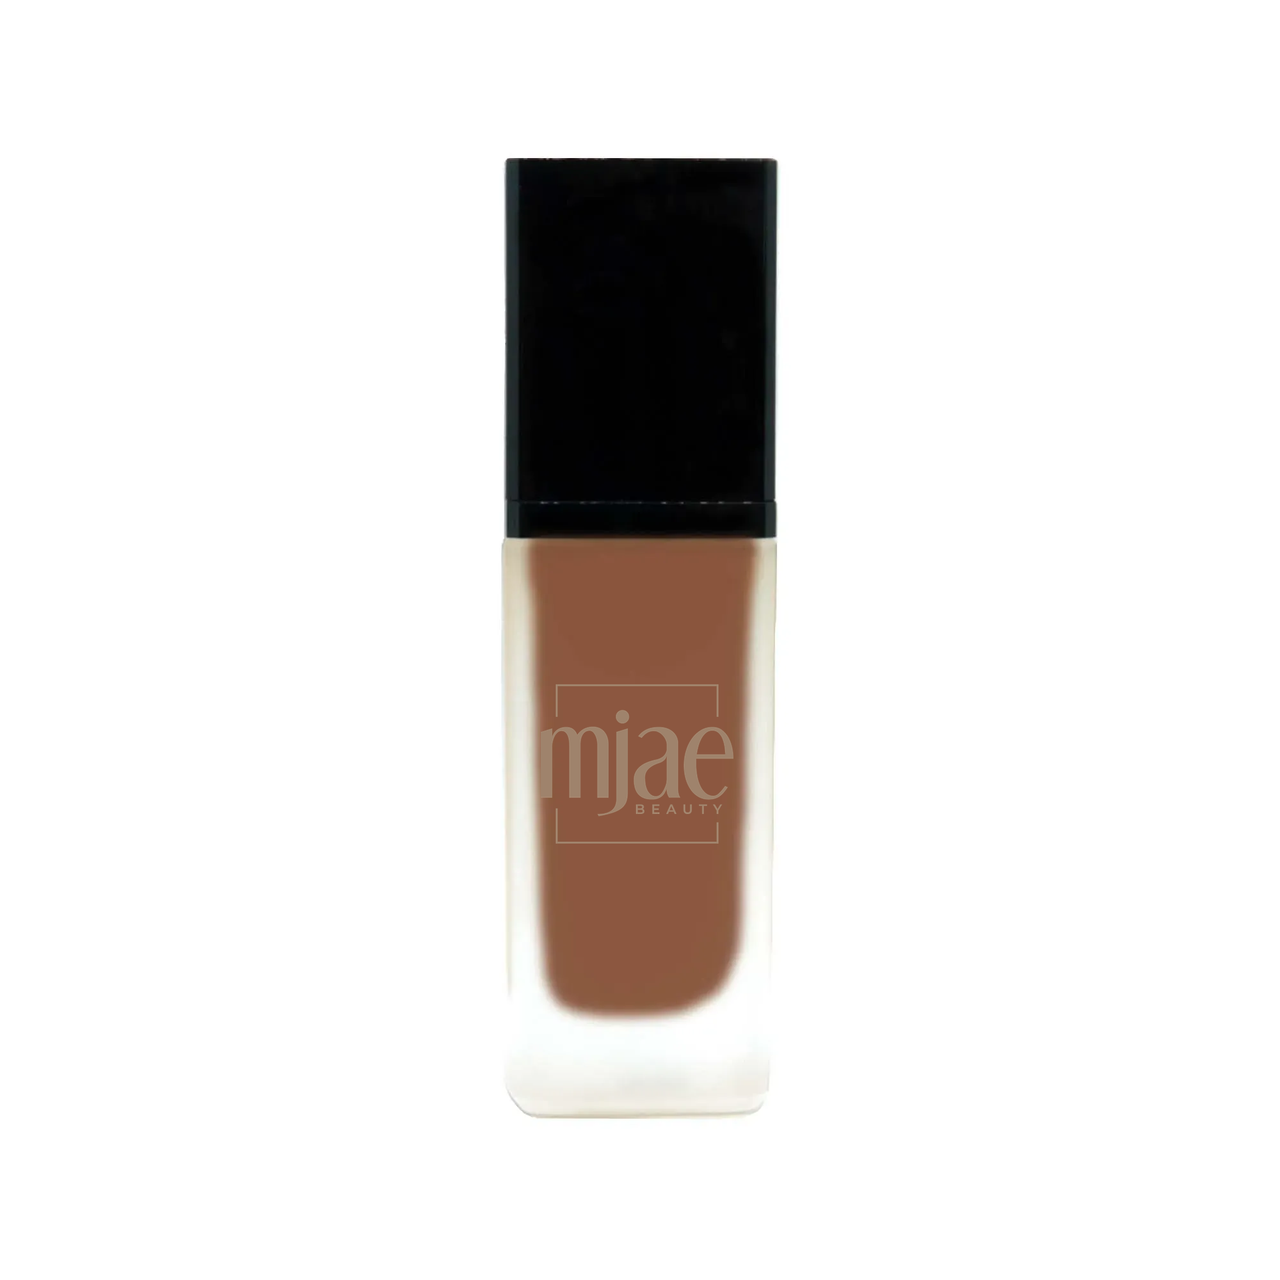 Mjae Foundation with SPF - Amber - Clean Beauty